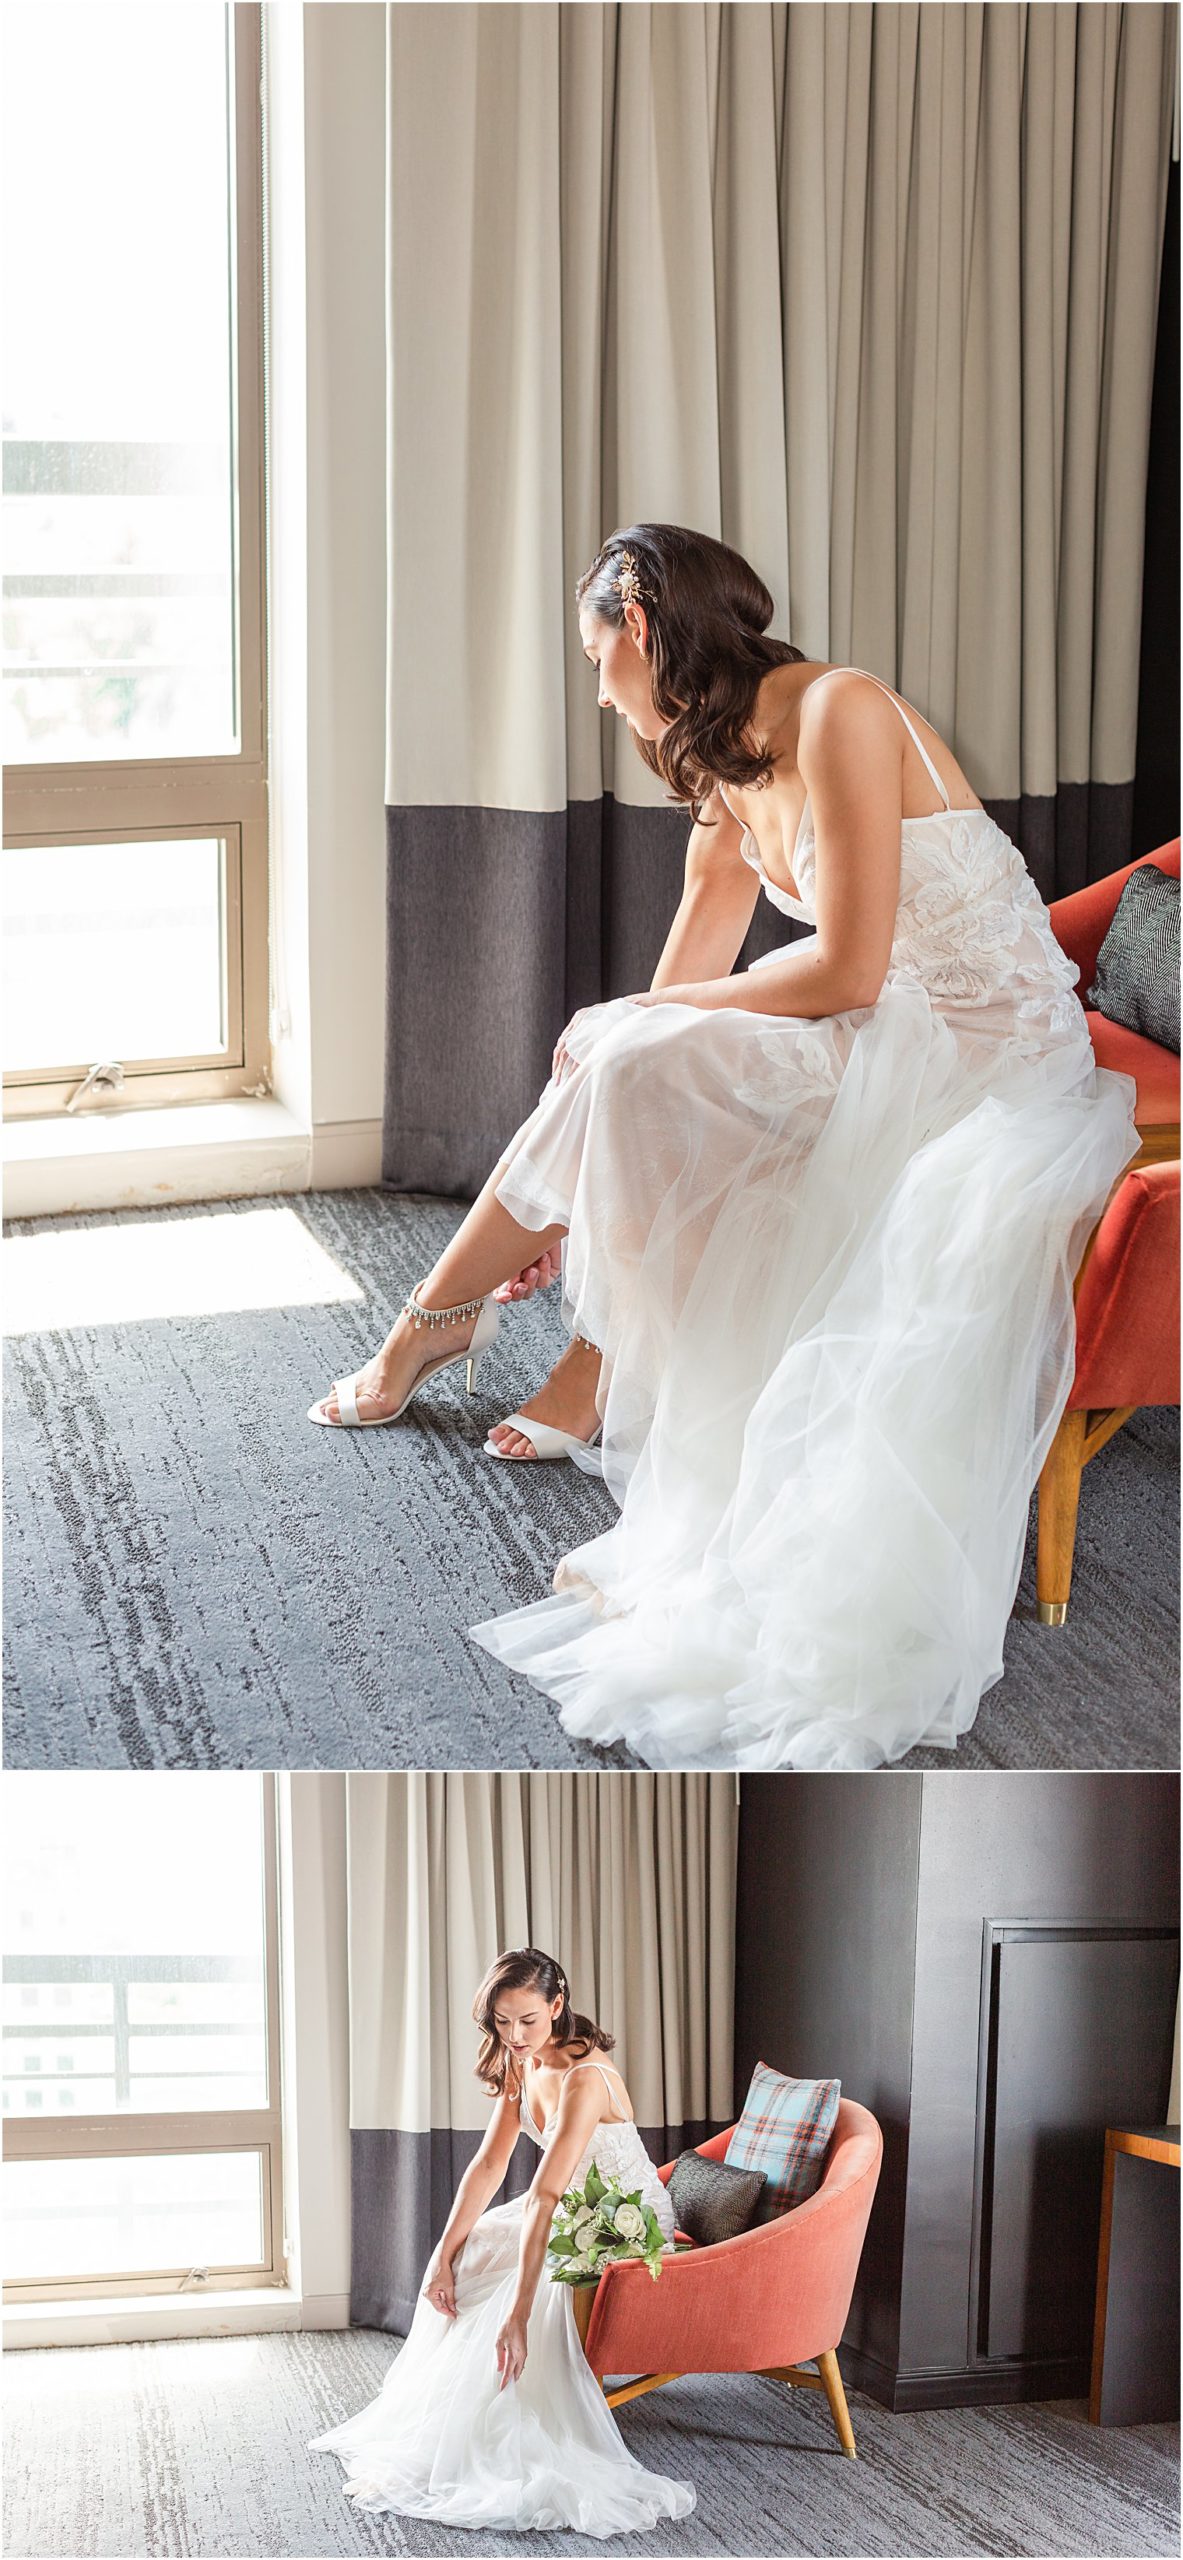 bride sitting in chair putting wedding shoes on